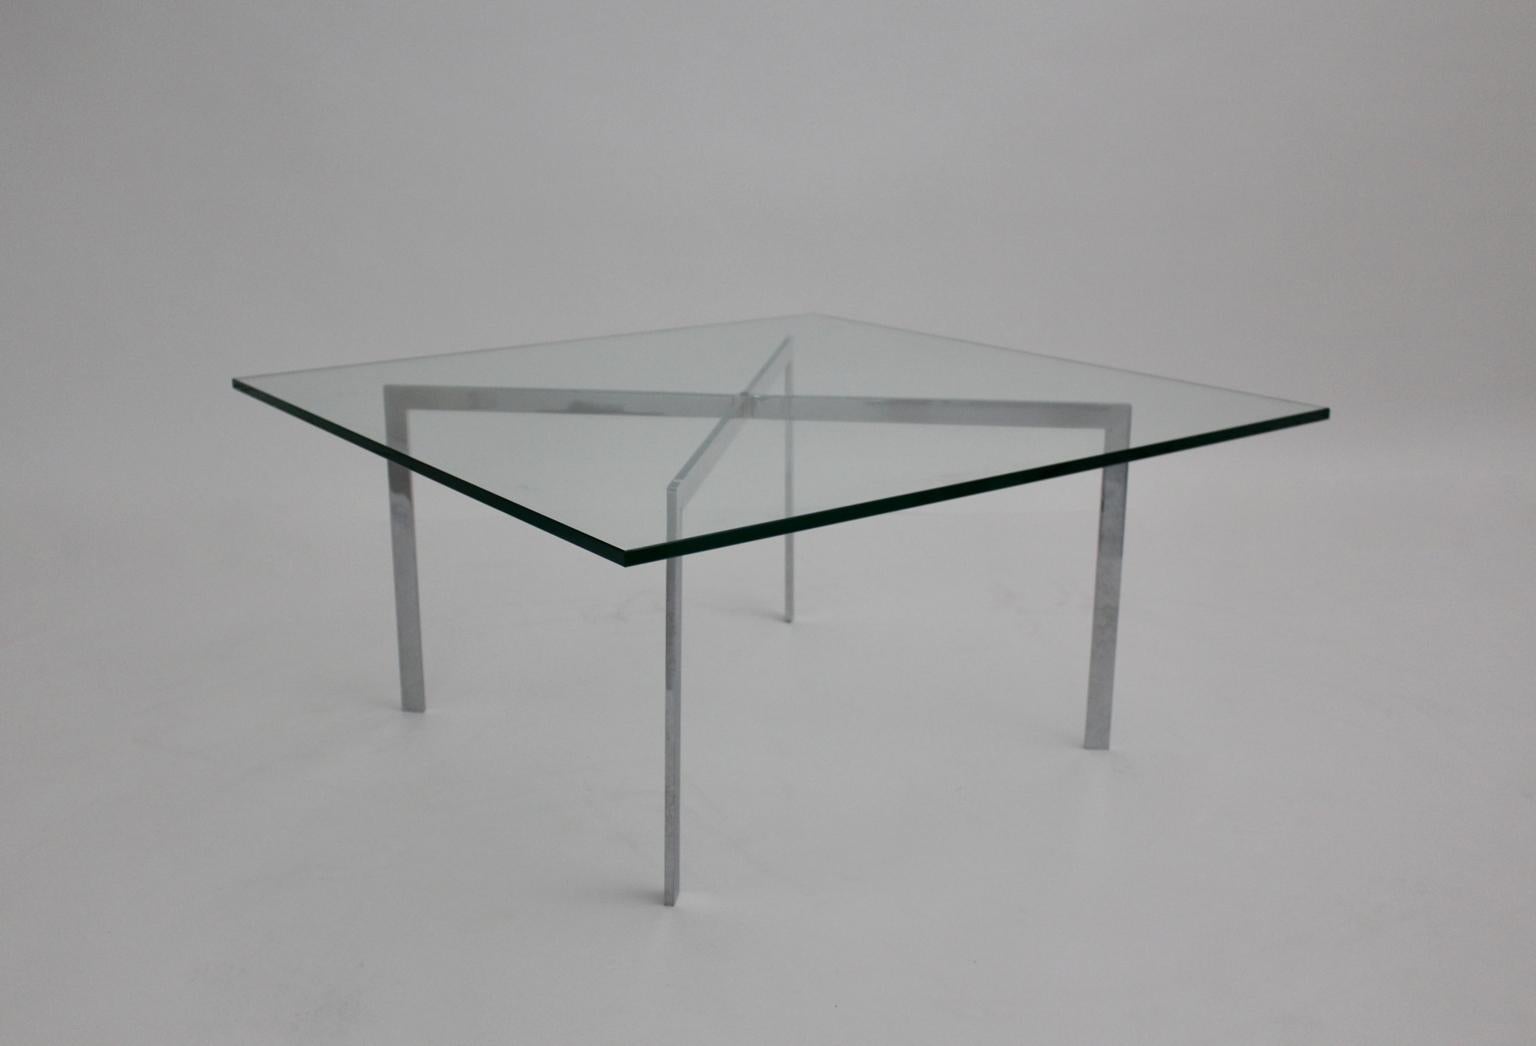 Bauhaus Vintage Chrome Glass Coffee Table Barcelona by Mies van der Rohe, 1929 In Good Condition For Sale In Vienna, AT